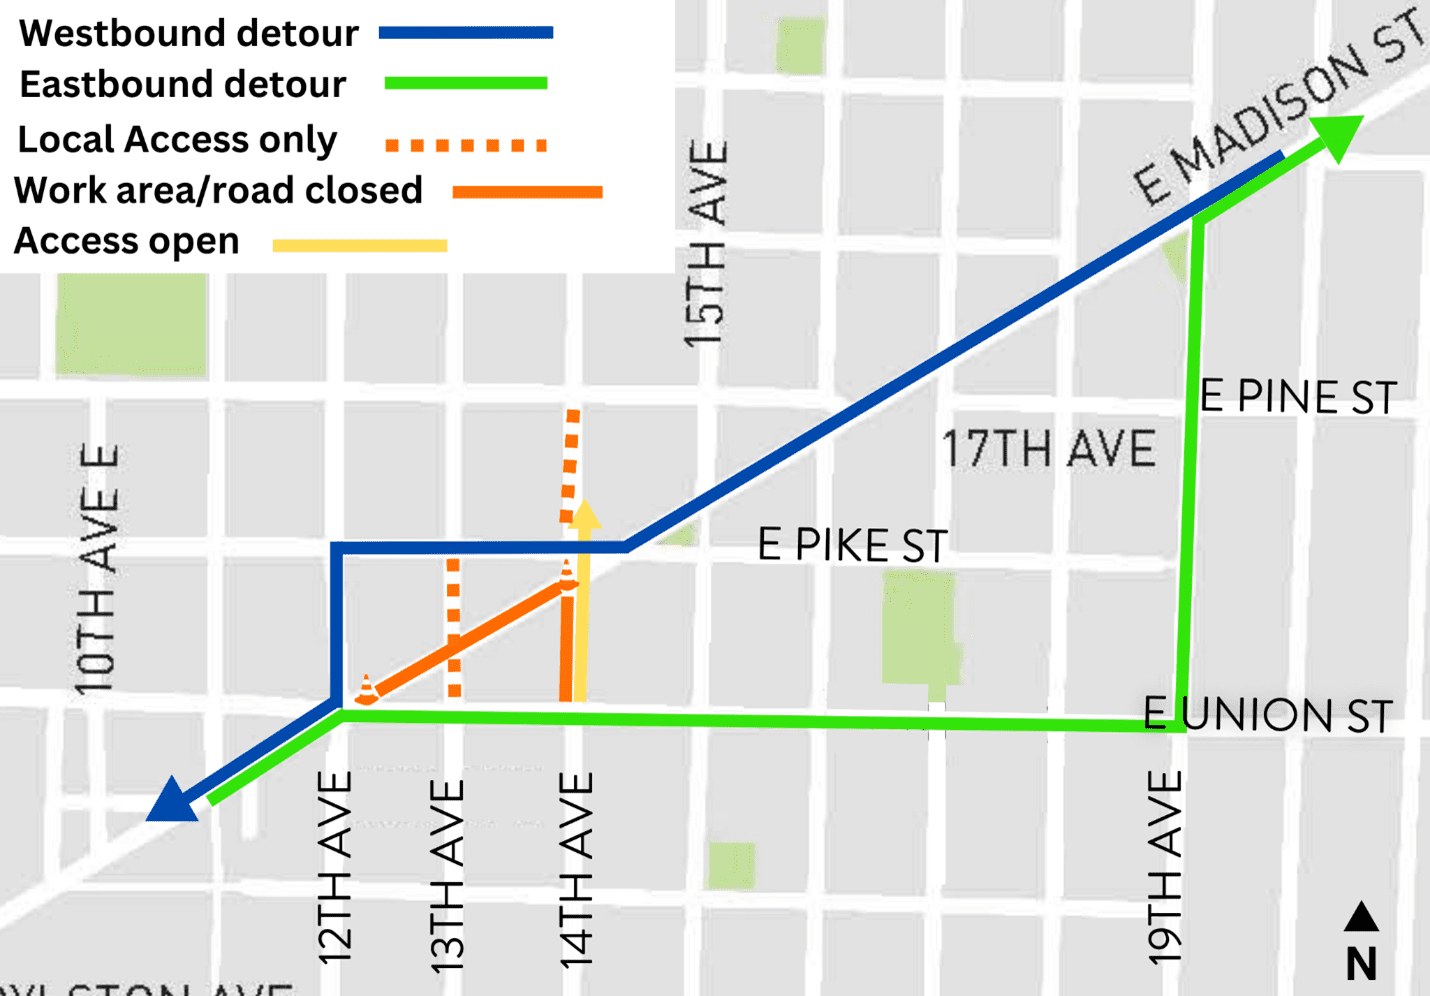 Map showing the closure are along E Madison St, from 12th Ave to 14th Ave. The map indicates a westbound detour via E Pike St and 12th Ave; an eastbound detour via E Union St and 19th Ave; local access only near the construction area, and where access remains open along 14th Ave.